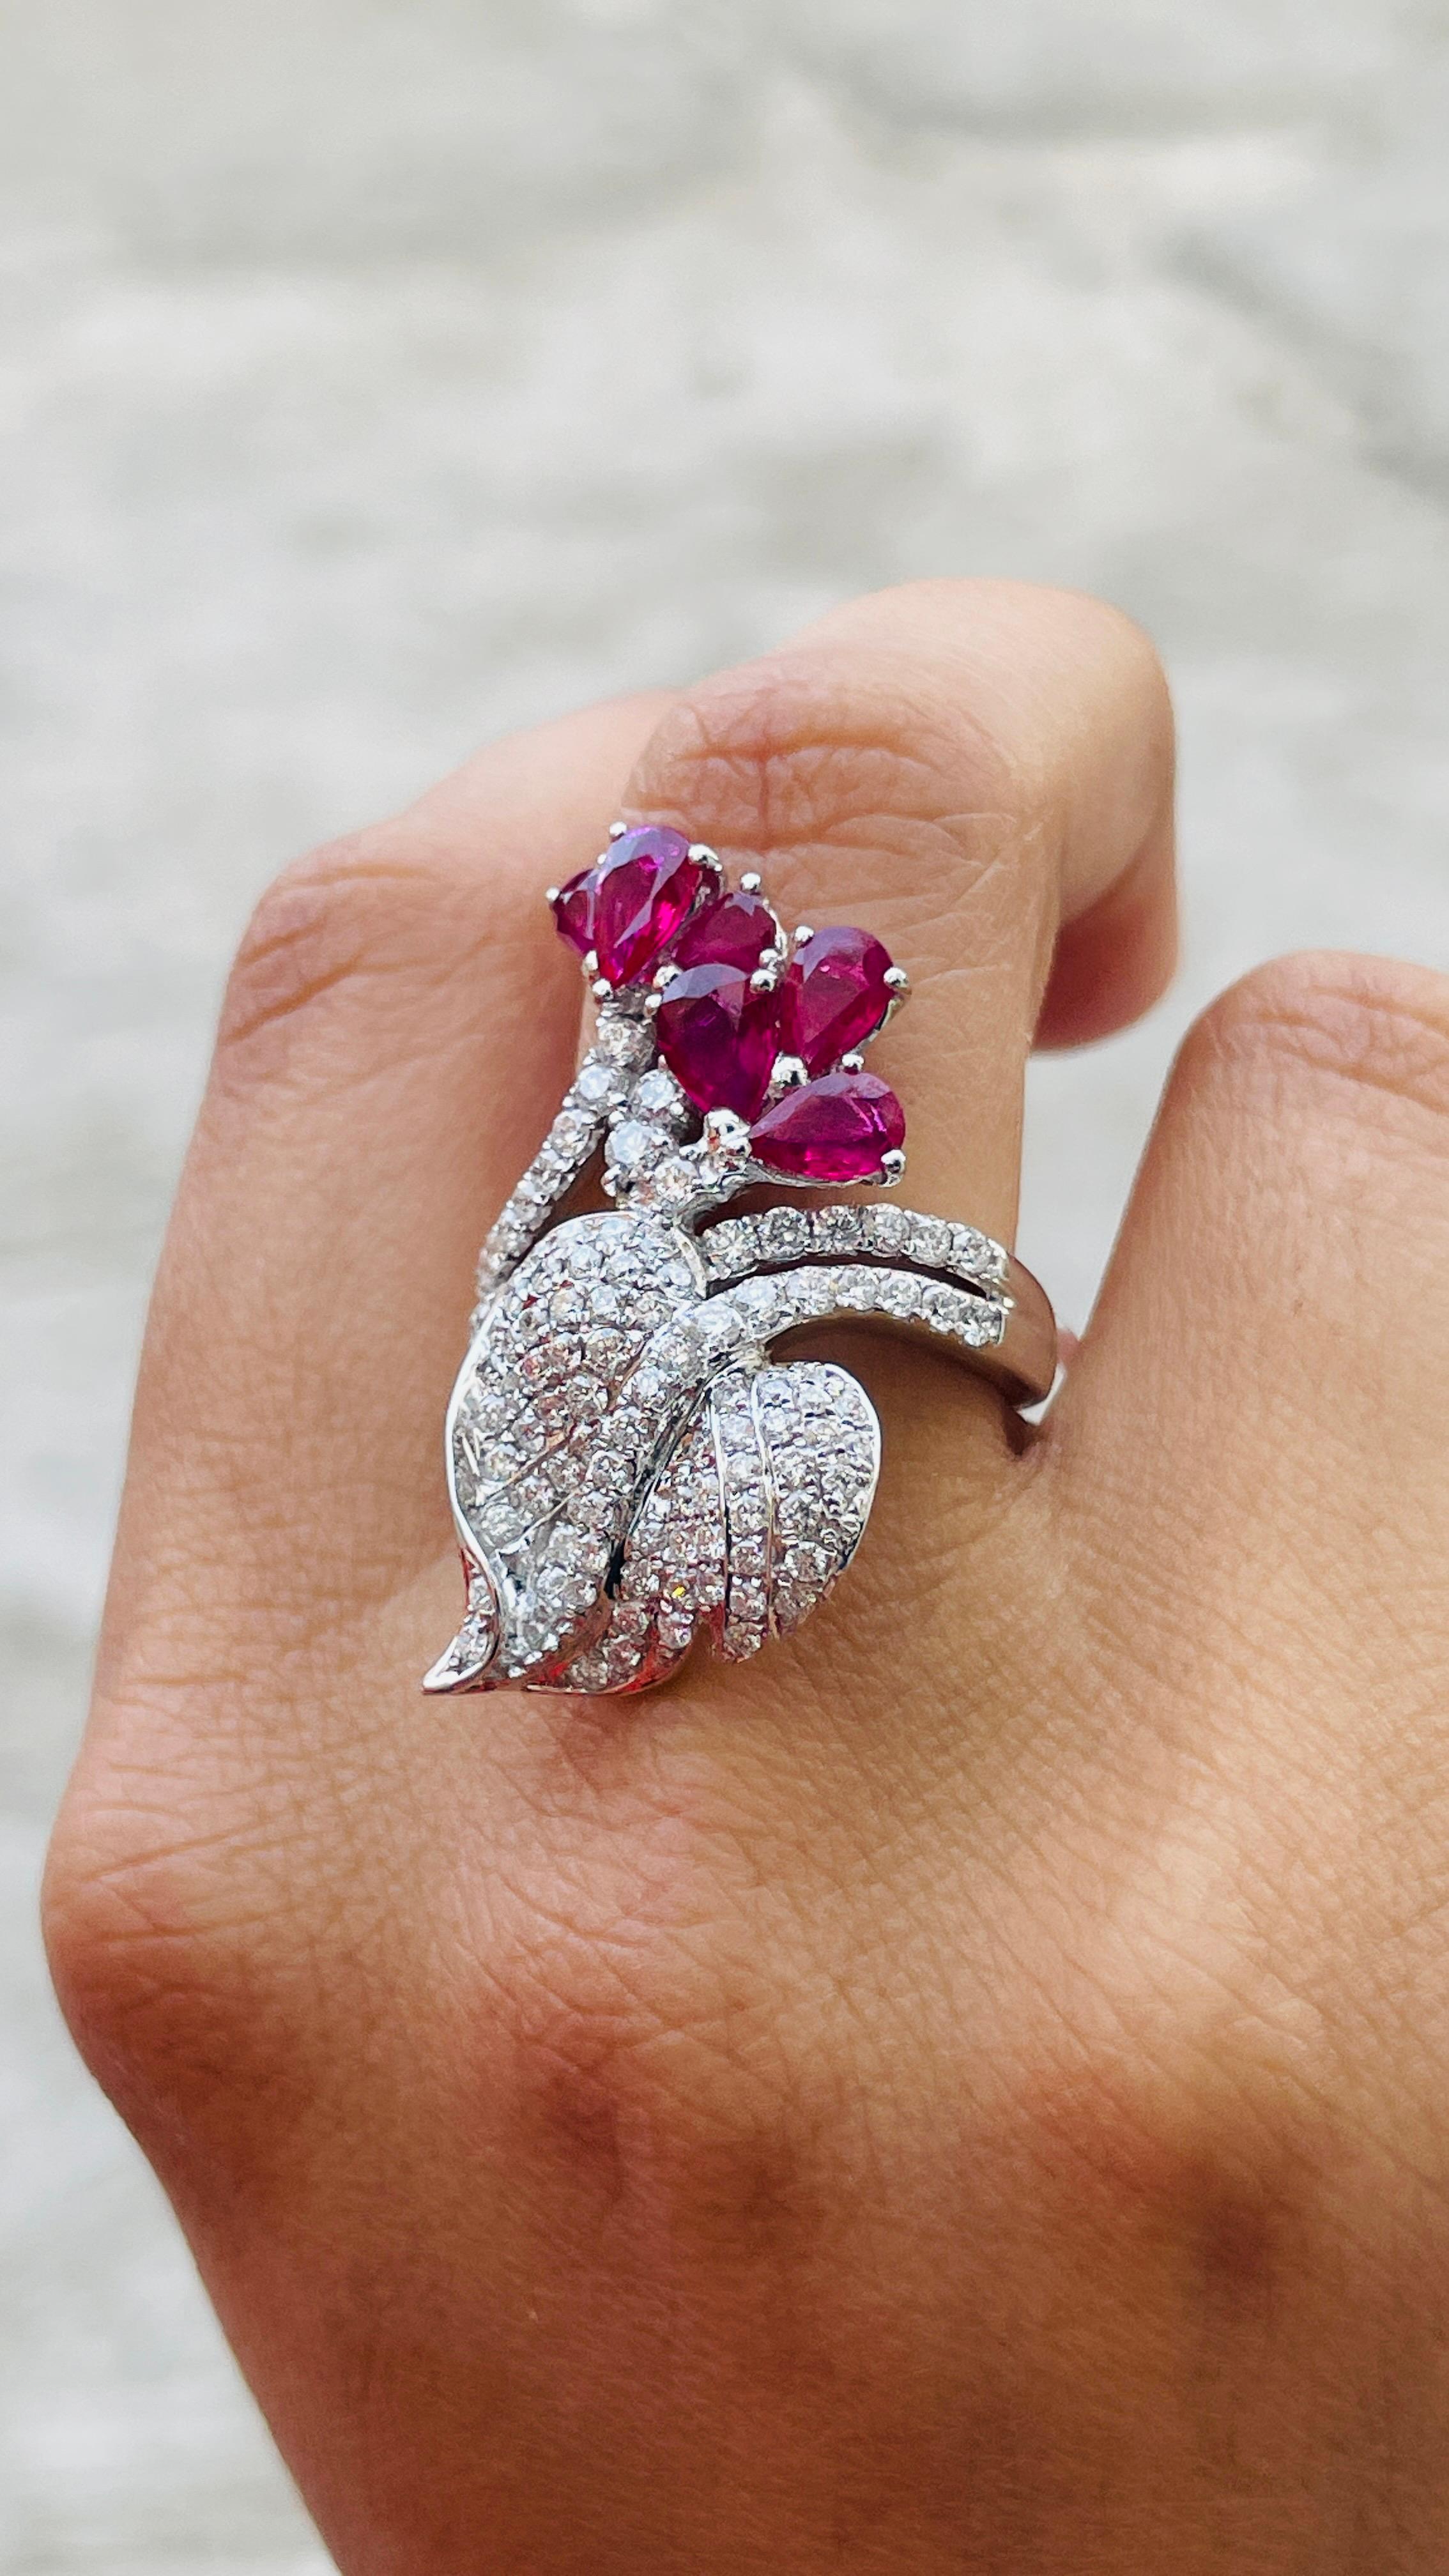 For Sale:  14K White Gold Pear Cut Ruby and Diamond Bridal Ring 7